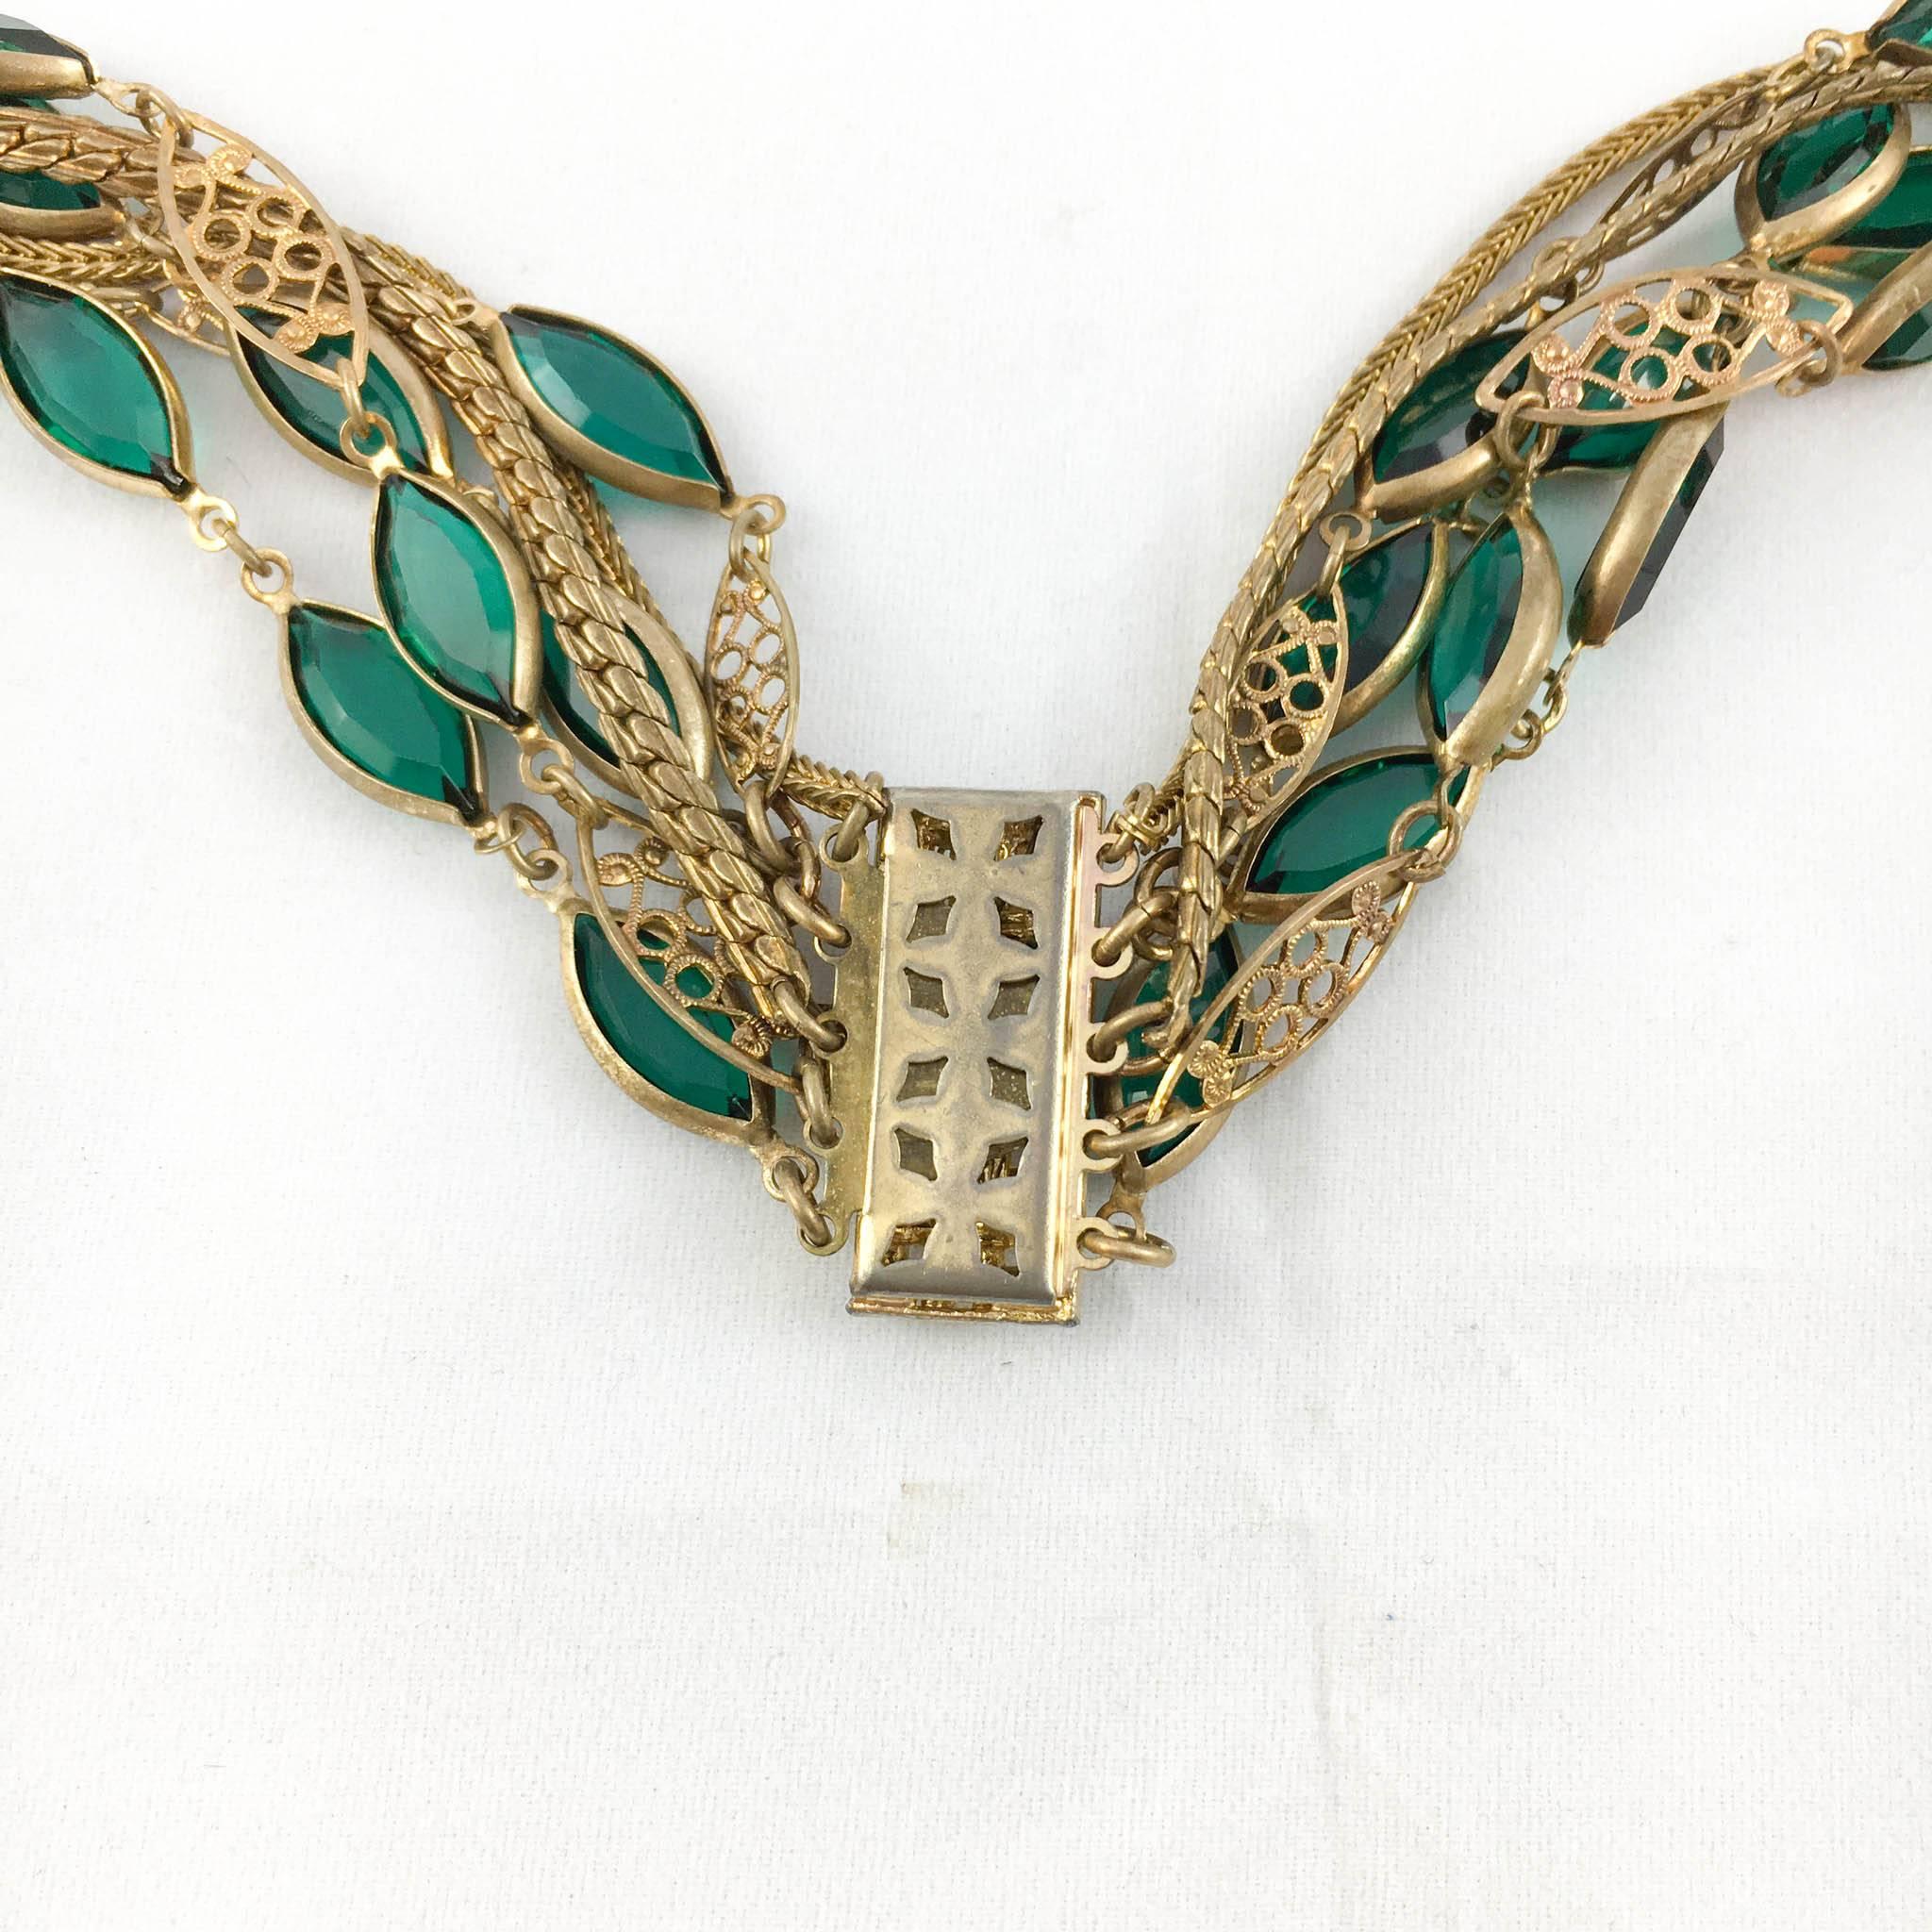 Multi-Strand Gold-Toned and Green Paste Necklace - 1940s/1950s For Sale 3